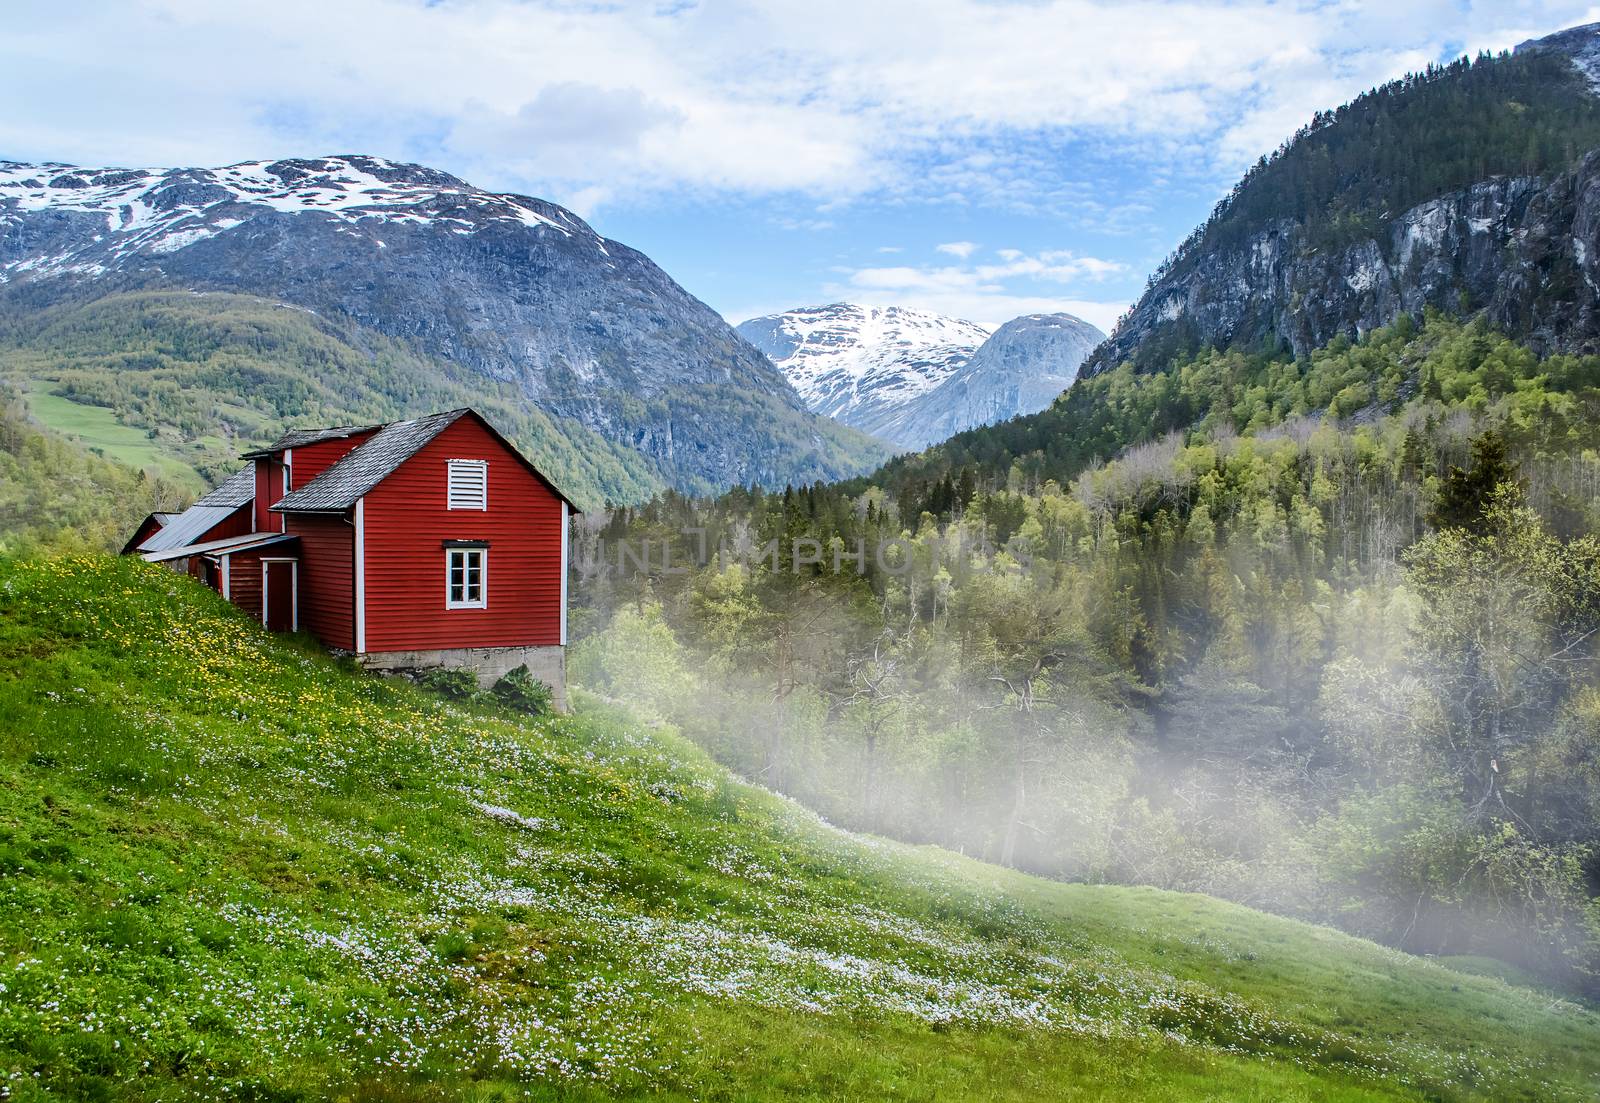 Red wooden cottage in the foggy valley. Green grass, white flowers. Stone snowy mountains. Stalheim, Norway. Mist.